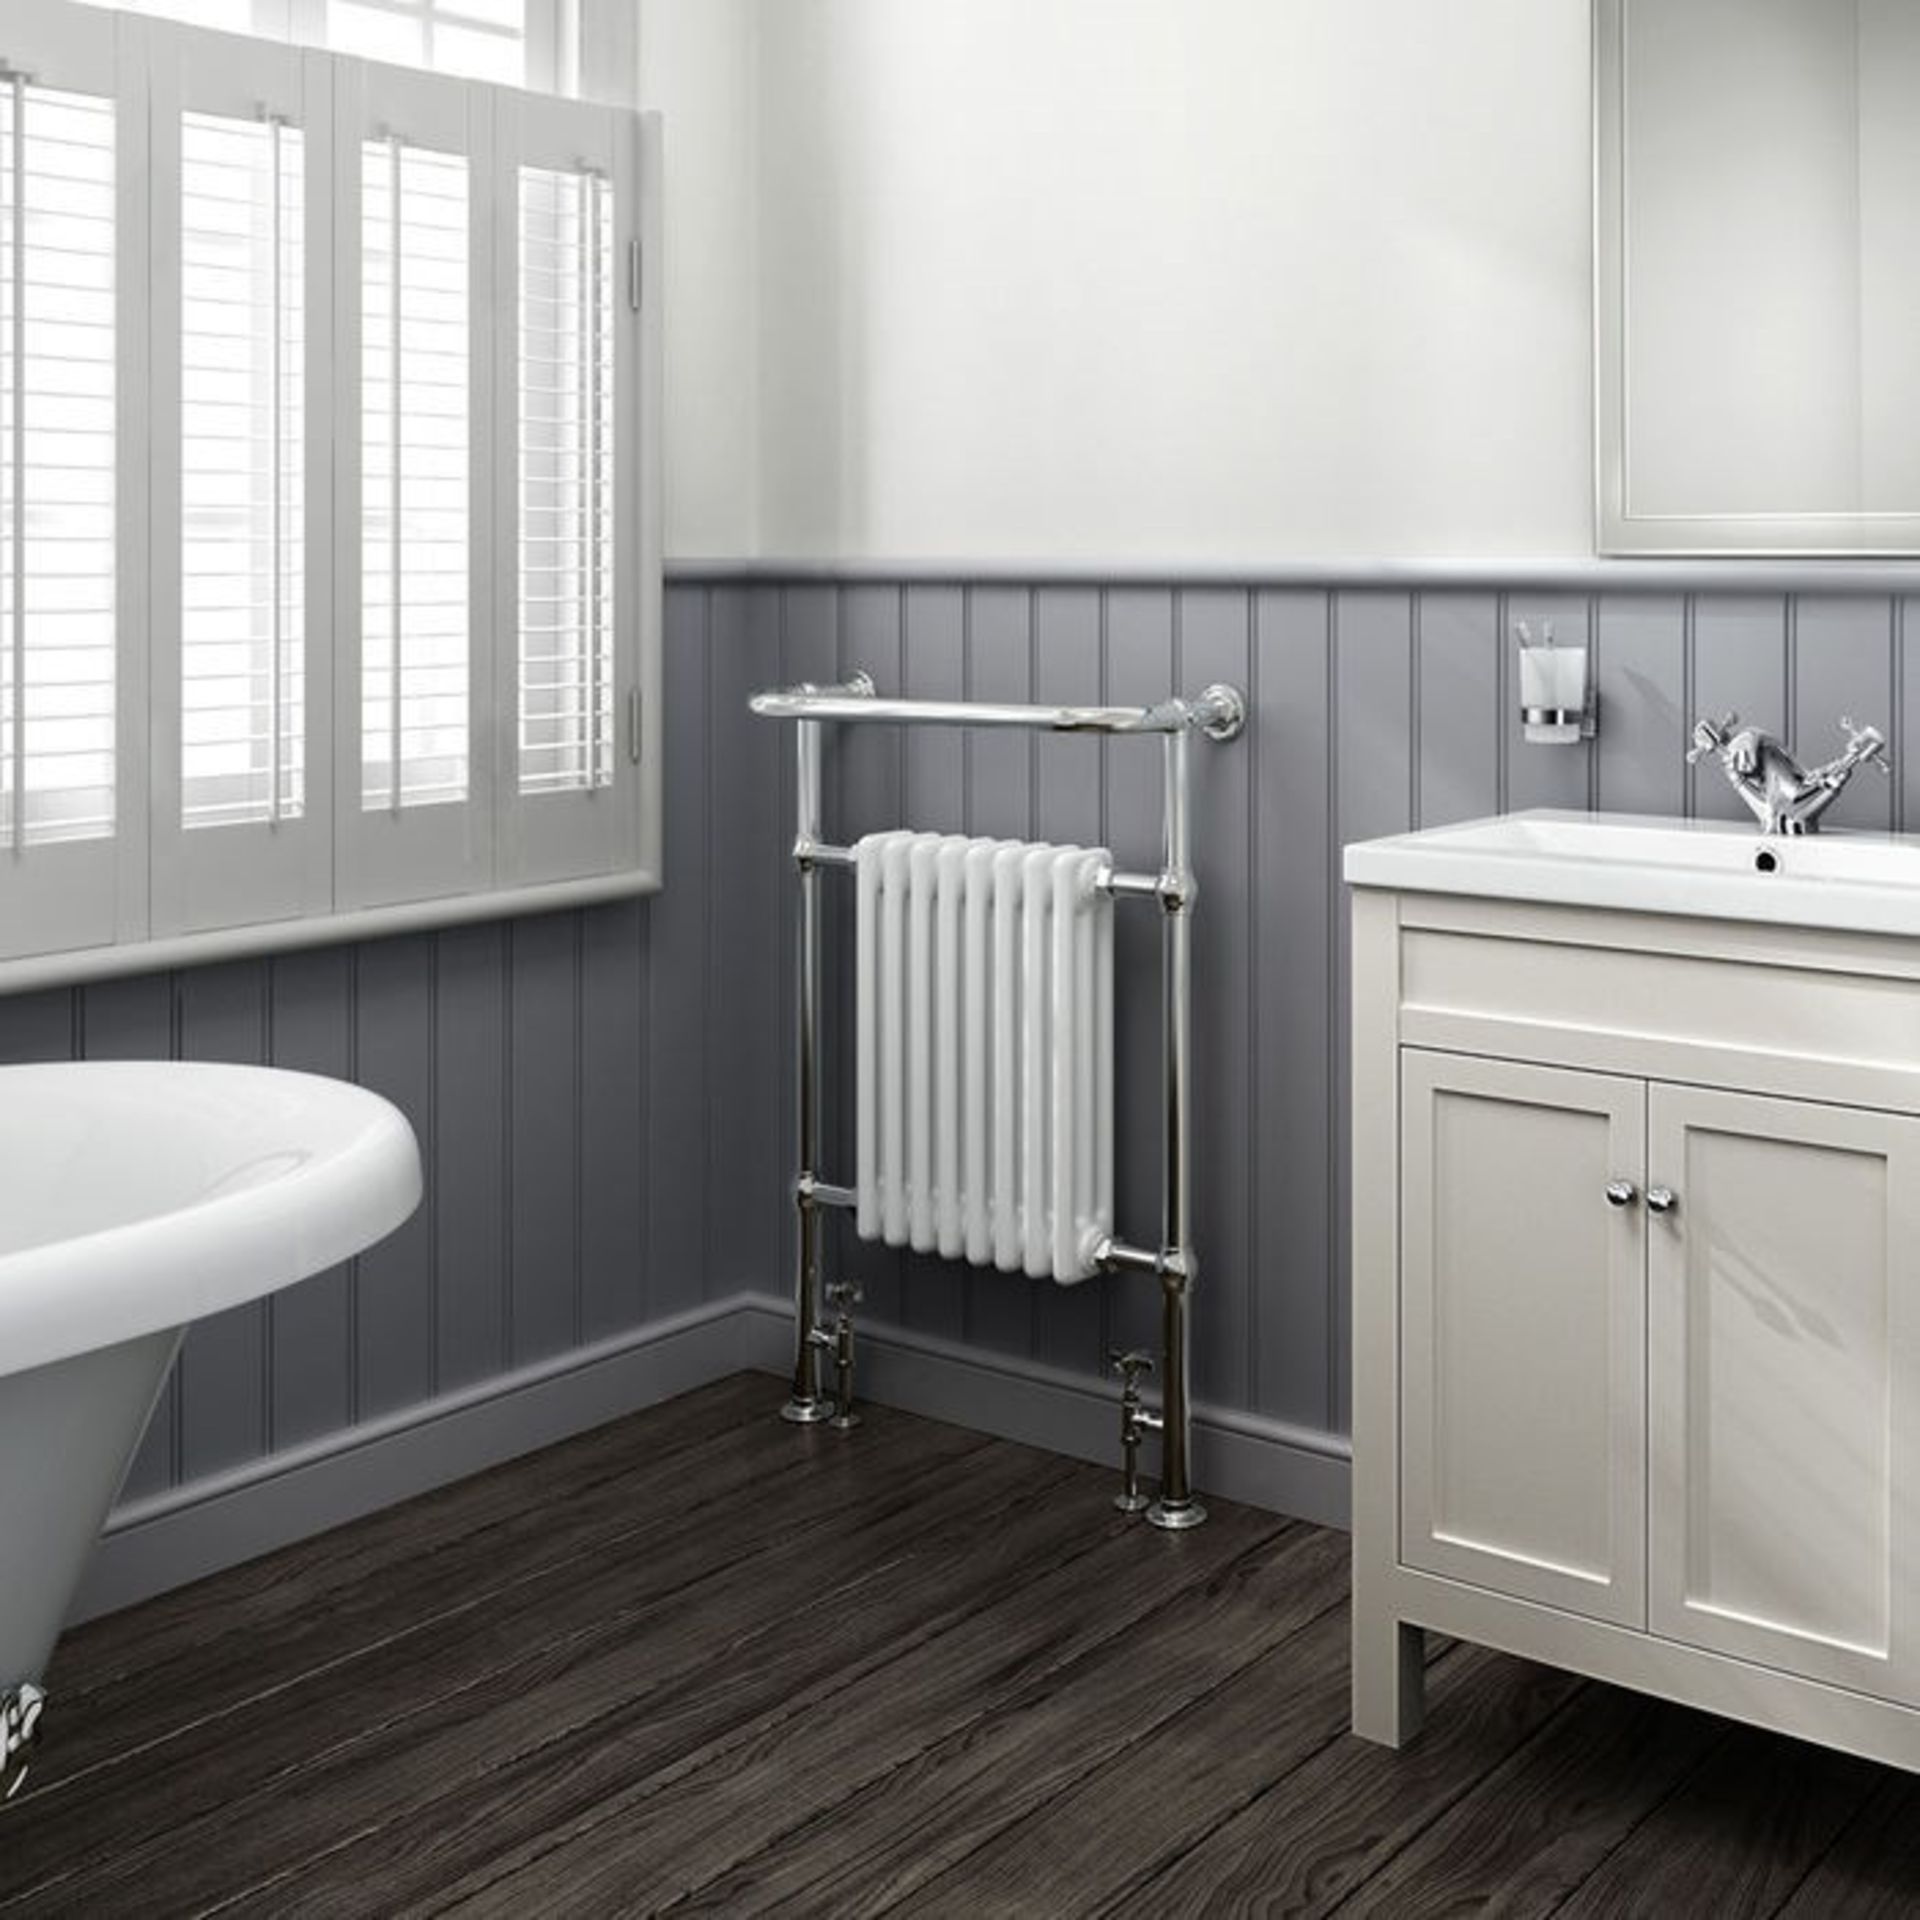 (VD32) 952x659mm Large Traditional White Premium Towel Rail Radiator. We love this because it ... - Image 2 of 3